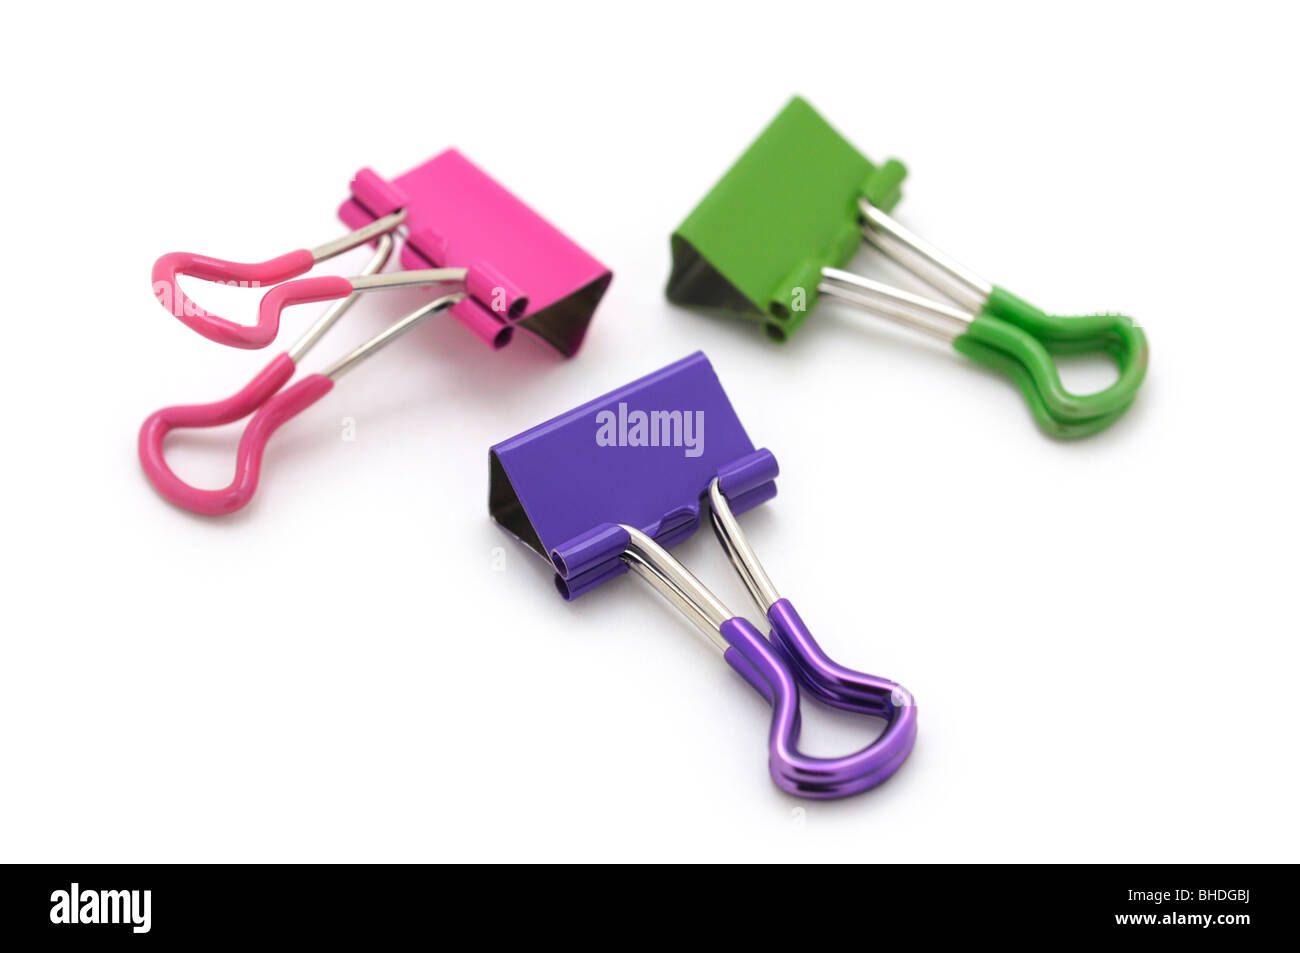 Binder Clips with Rubberized Grips Stock Photo